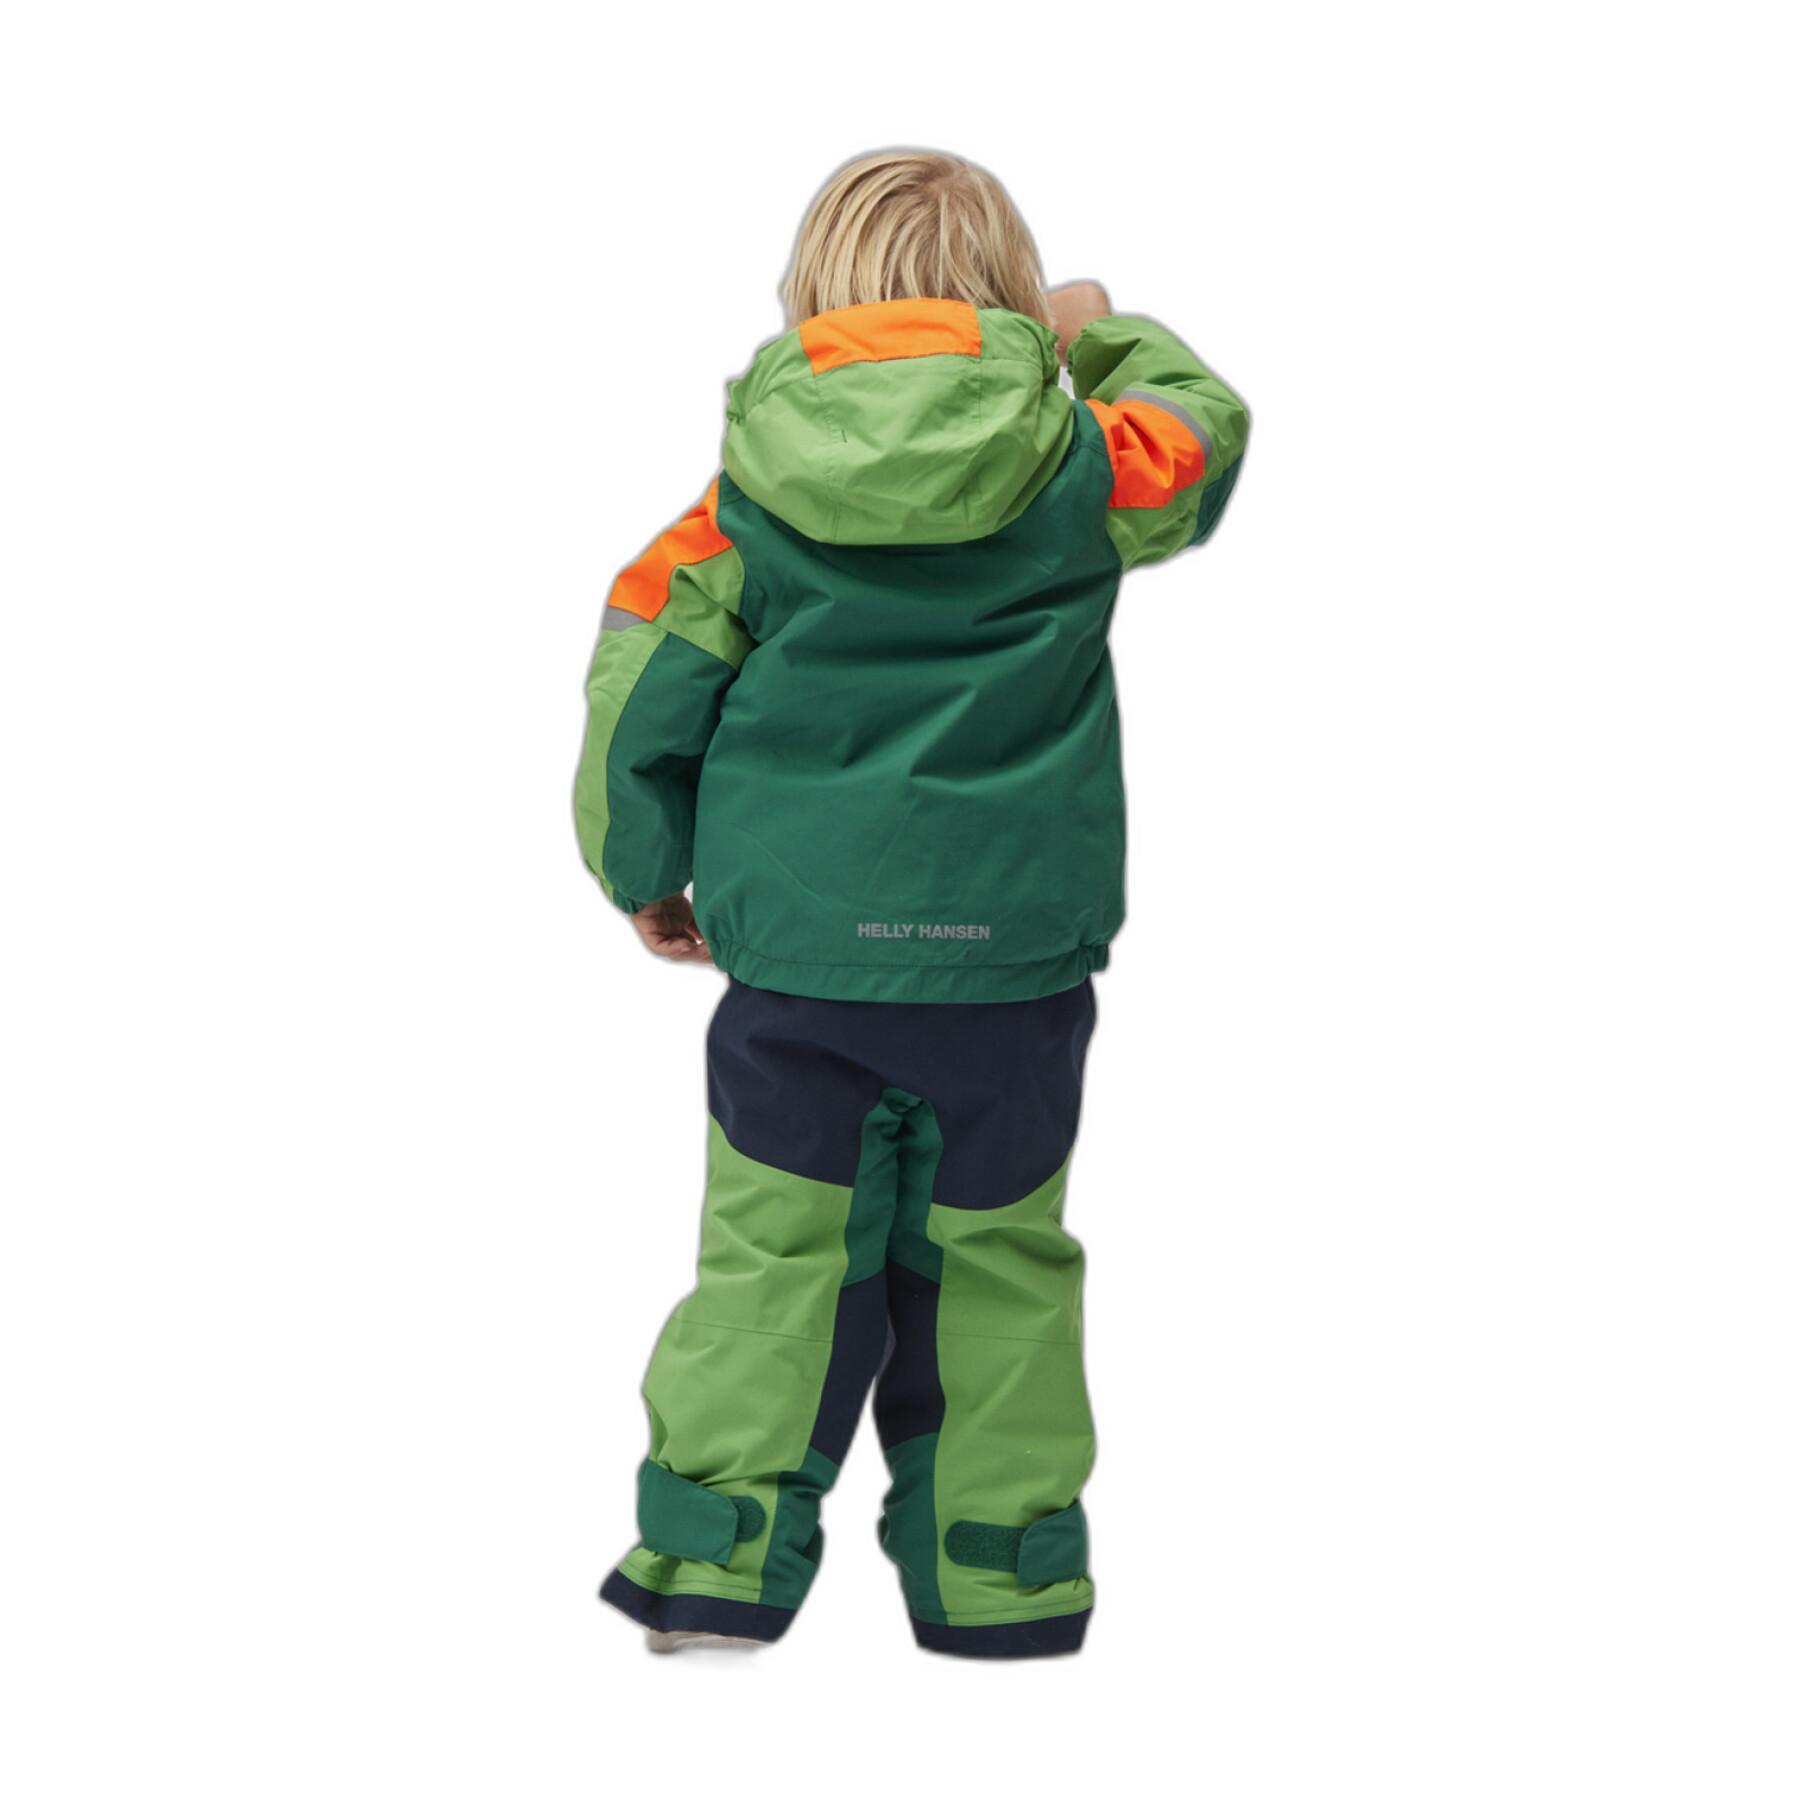 Giacca per bambini Helly Hansen Rider 2.0 Ins